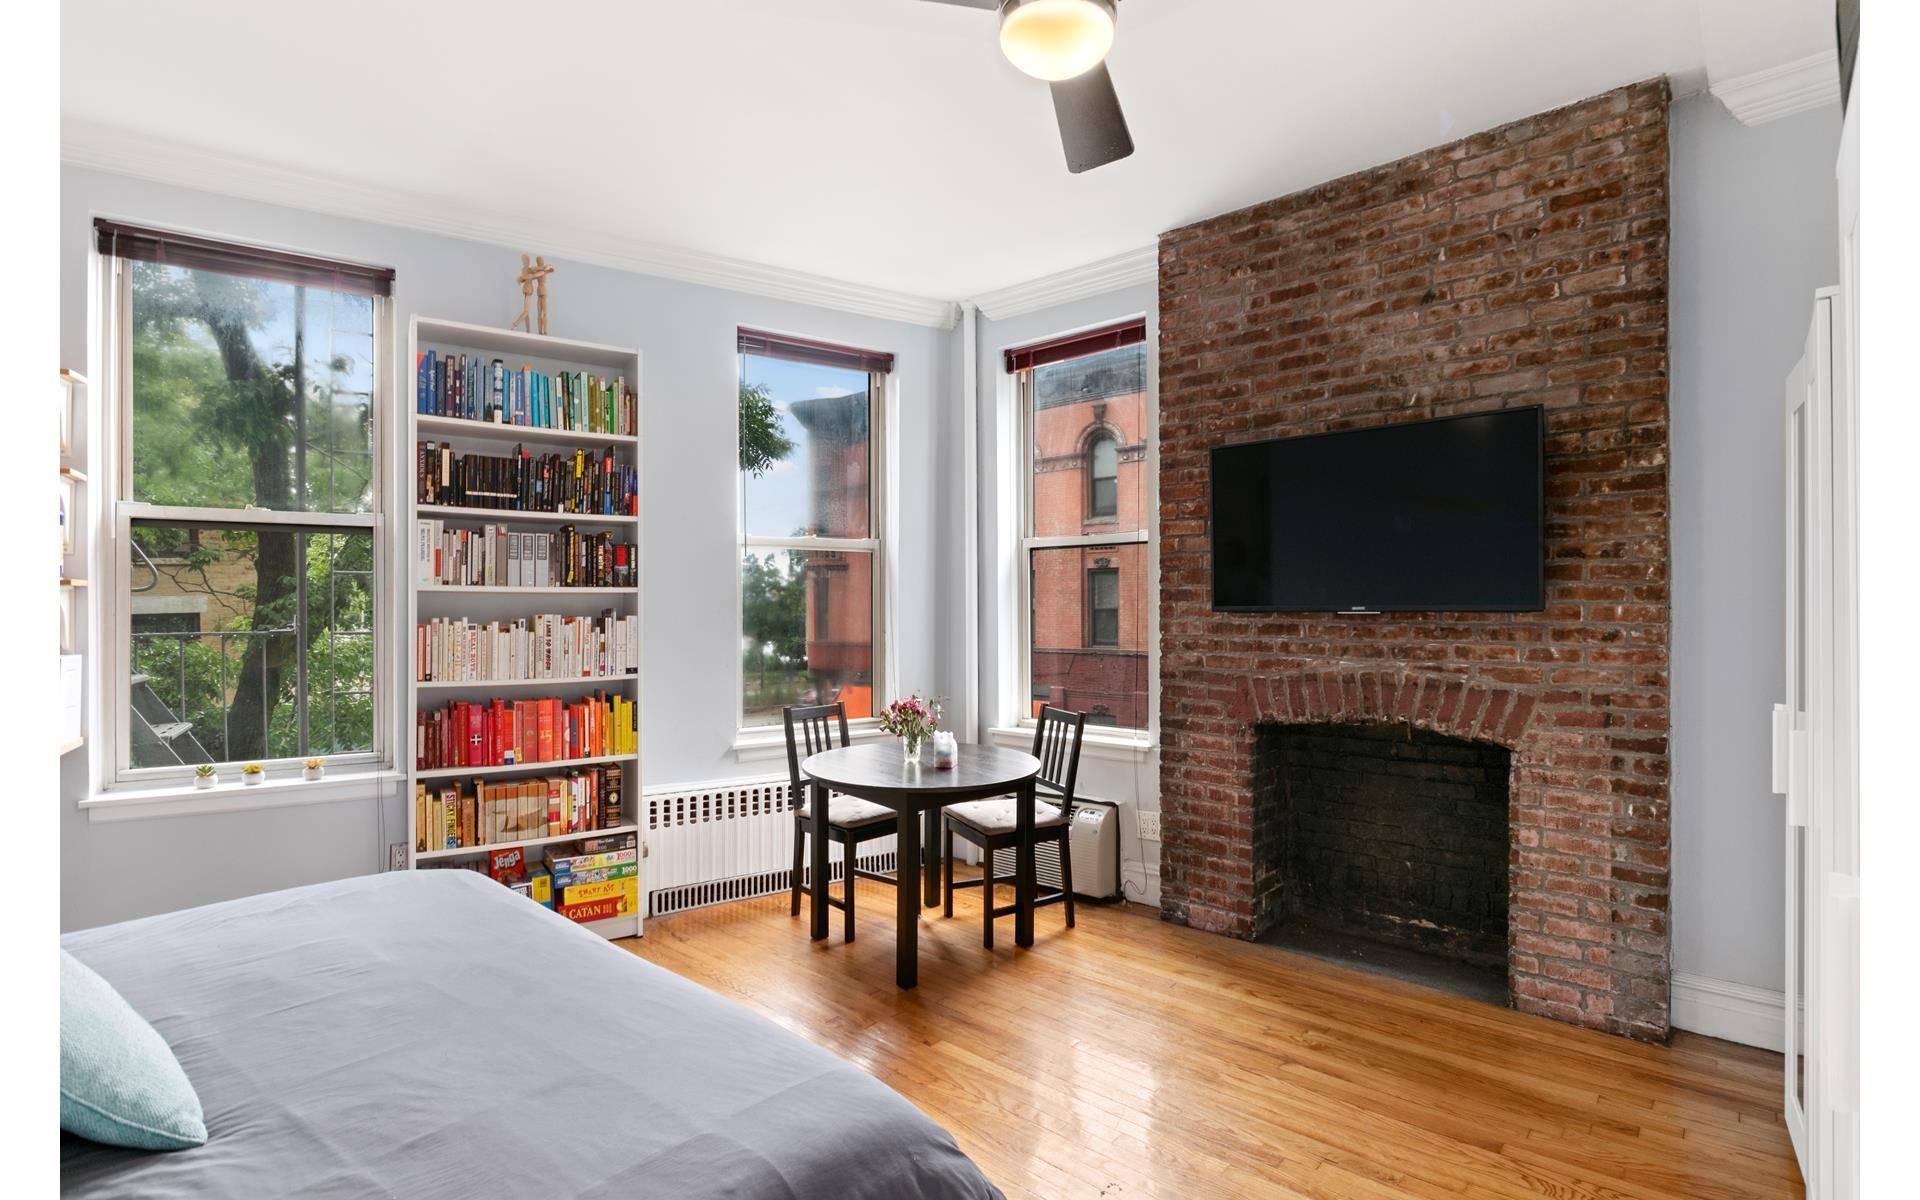 UNLIMITED SUBLETTING ALLOWED FROM DAY 1 FURNISHED, bright, sunny CO OP corner Alcove STUDIO apartment in the West Village !